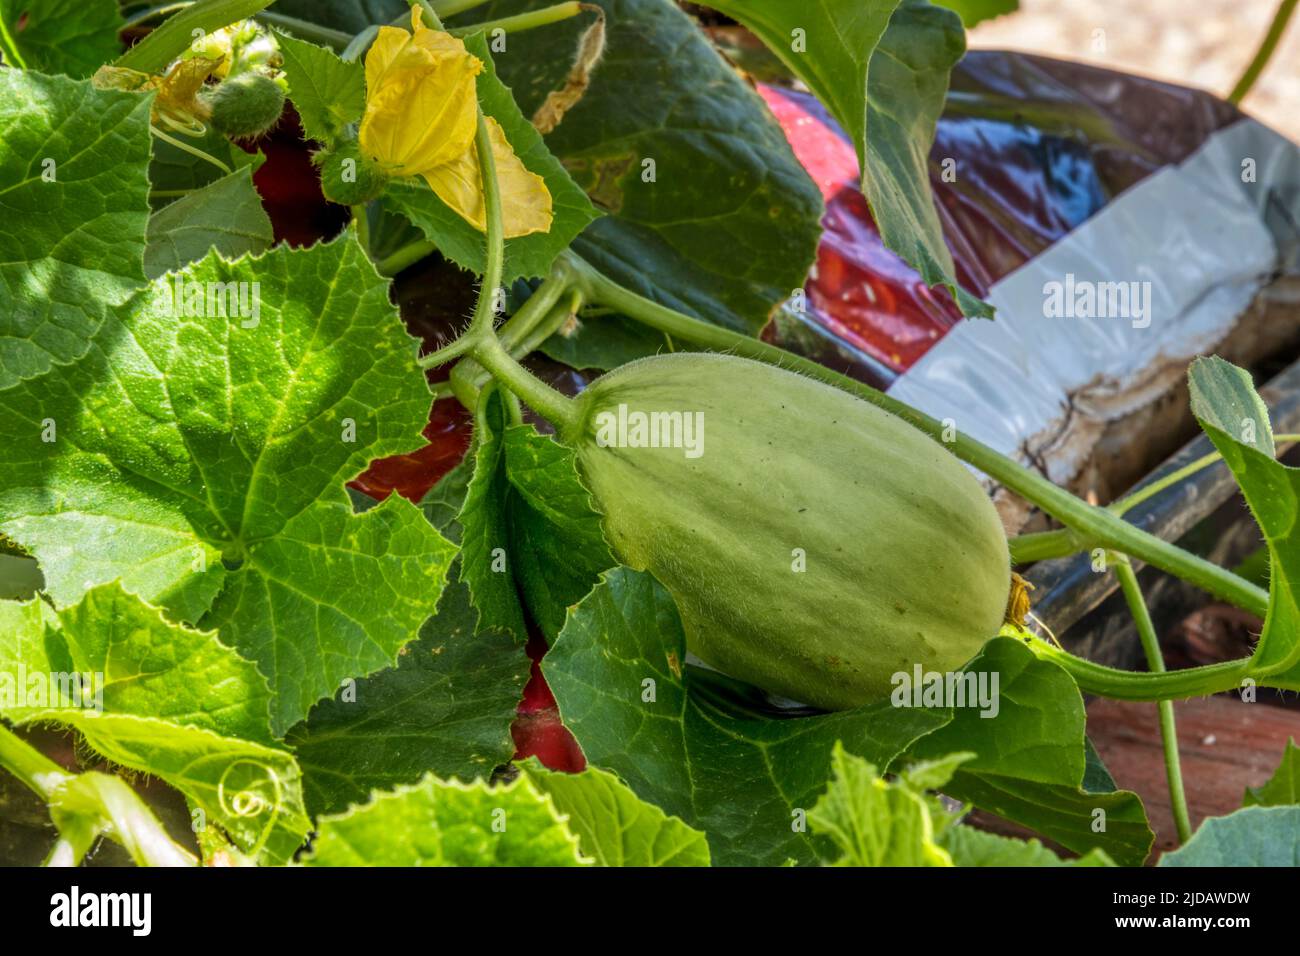 A young Emir F1 melon, Cucumis melo, growing in a growbag in a greenhouse. Stock Photo